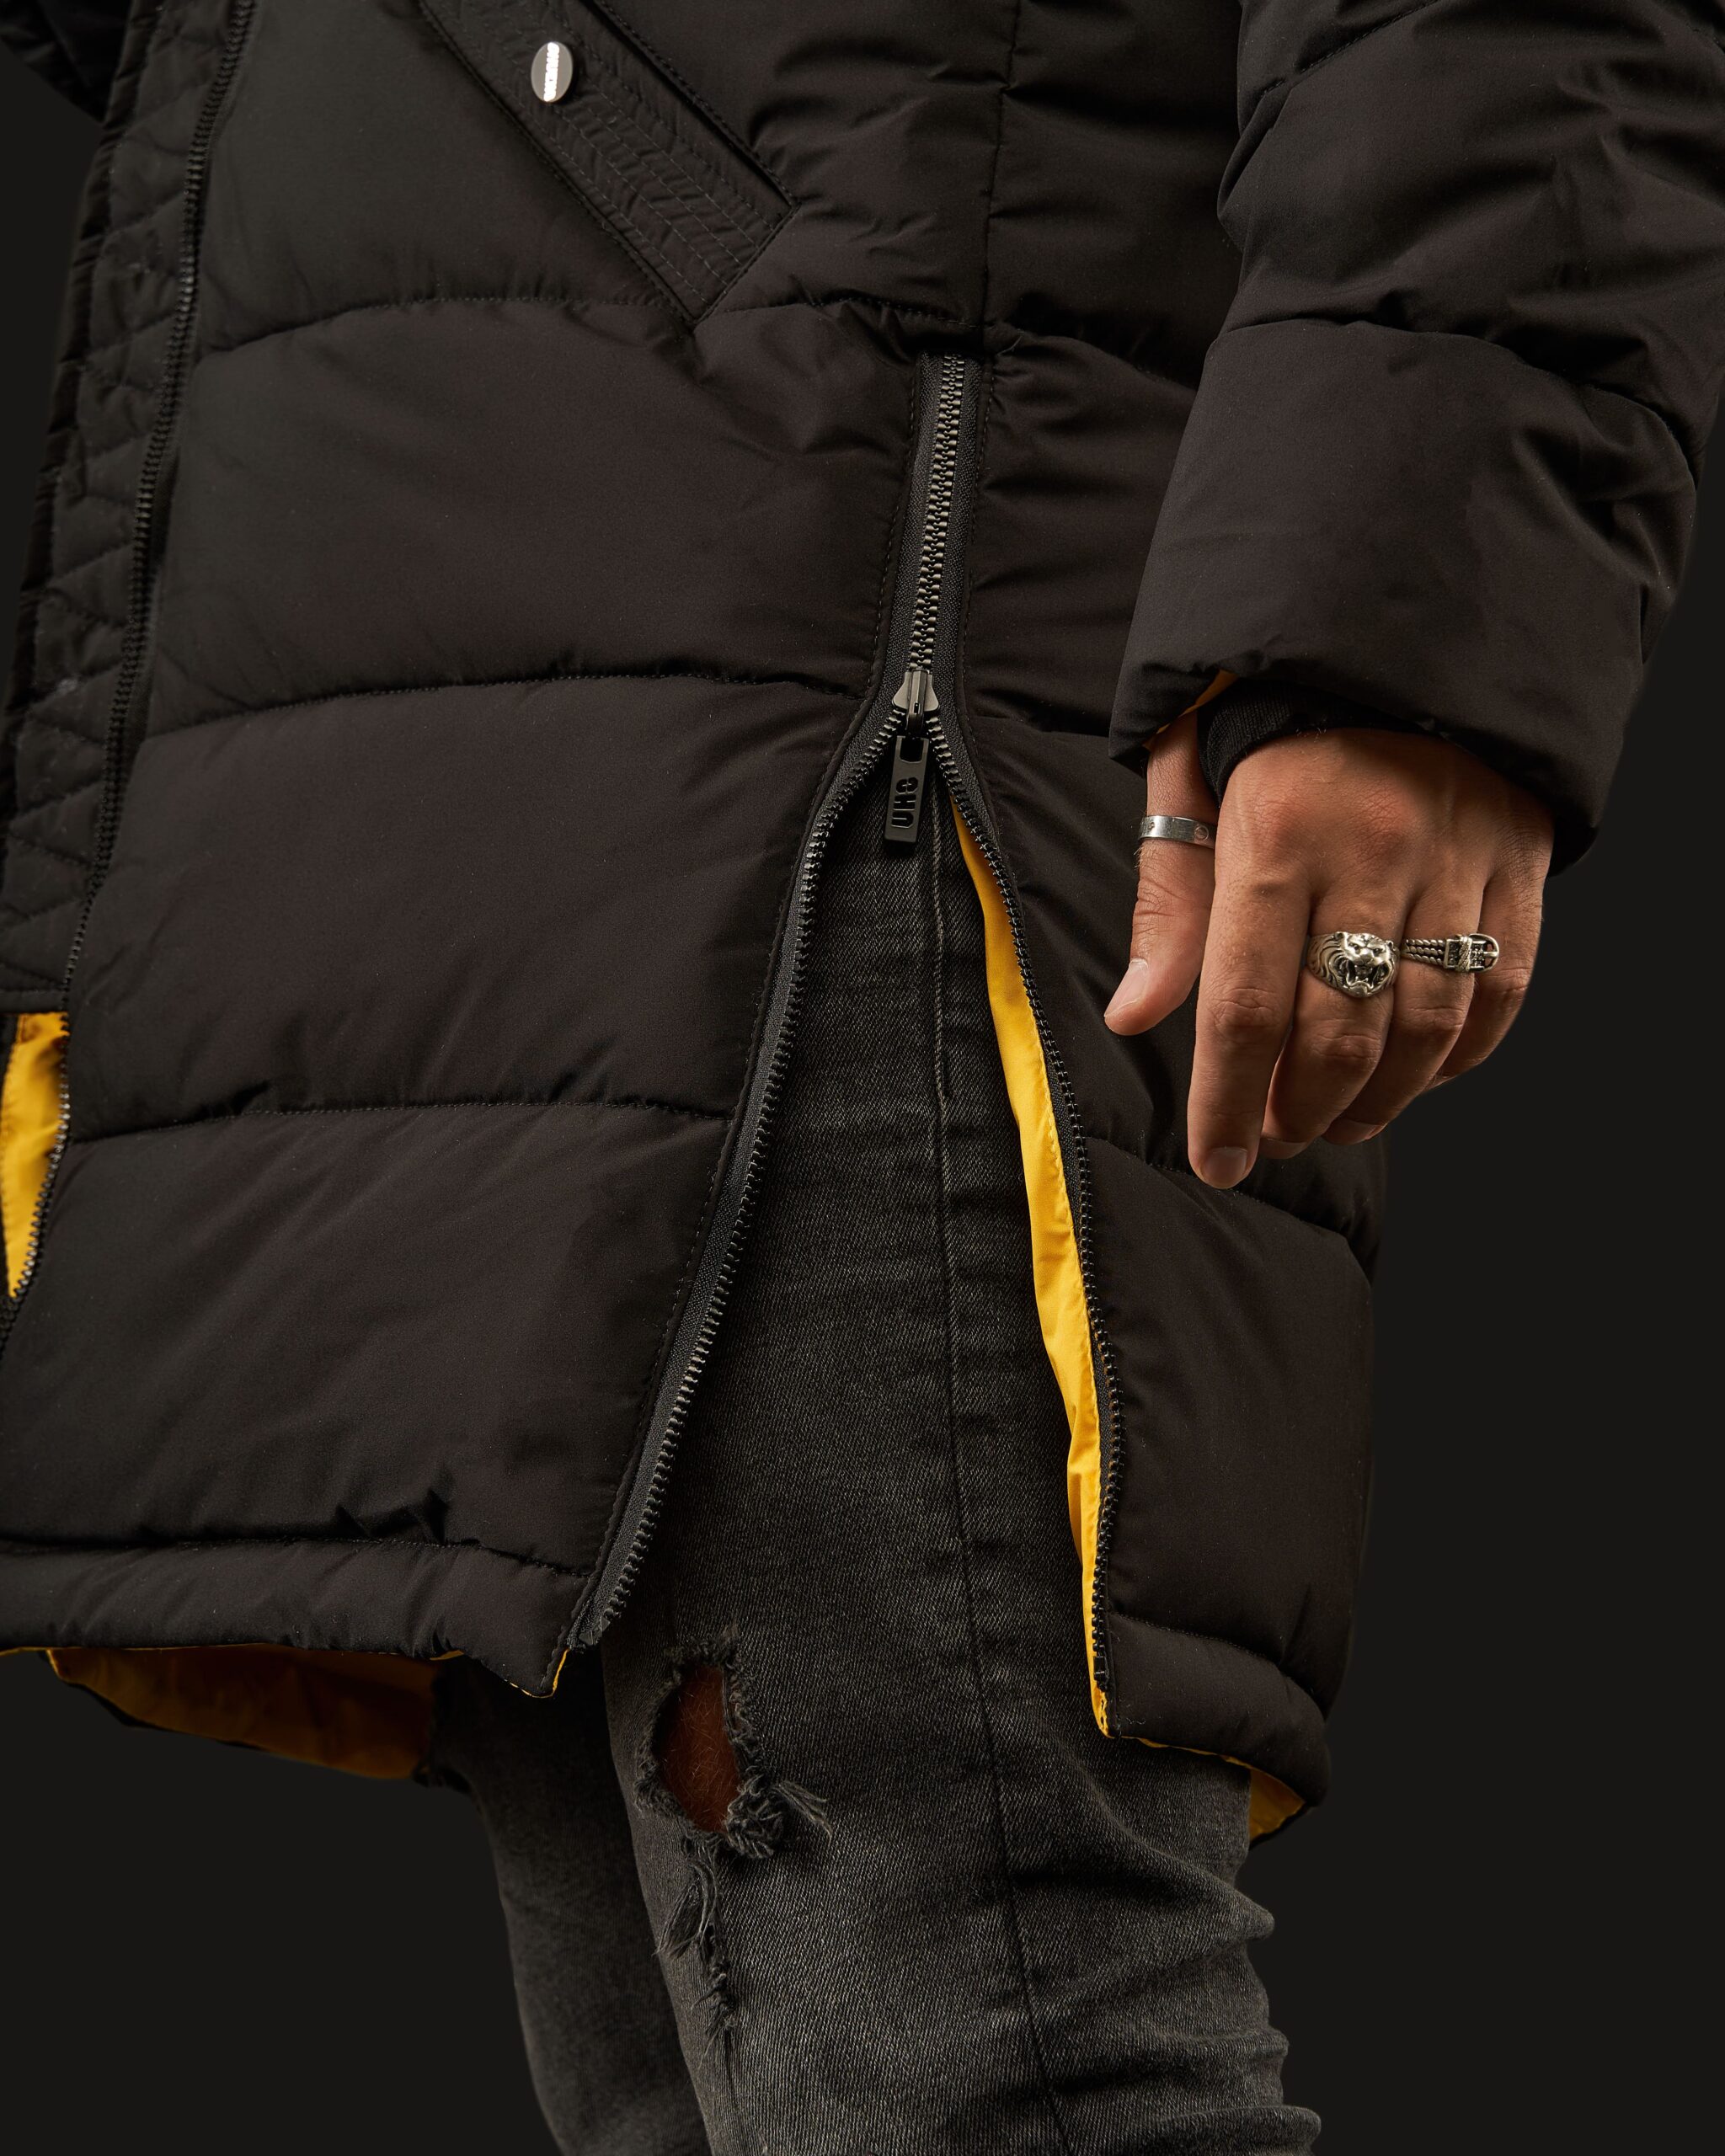 Down jacket Image: https://ohueno-official.com/wp-content/uploads/m01268-scaled.jpg